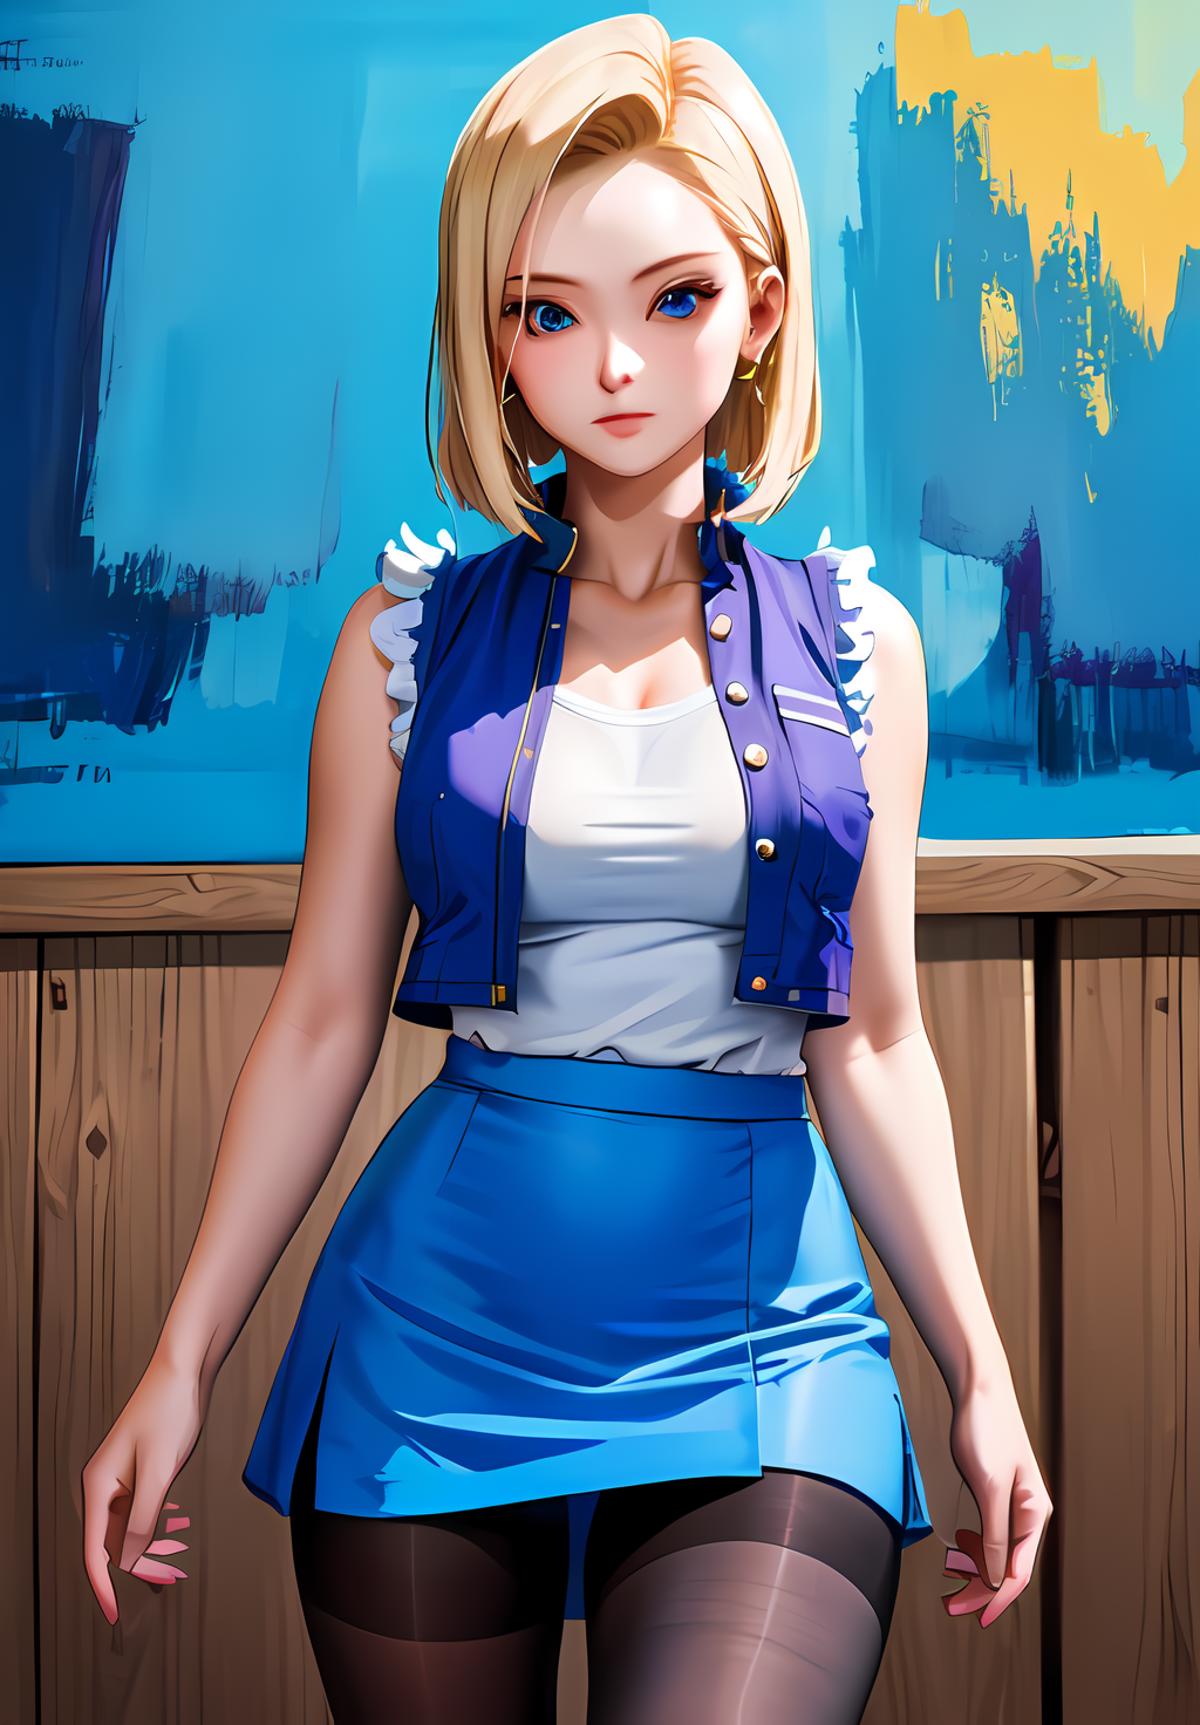 C18 / Android 18 - Dragon Ball image by AsaTyr